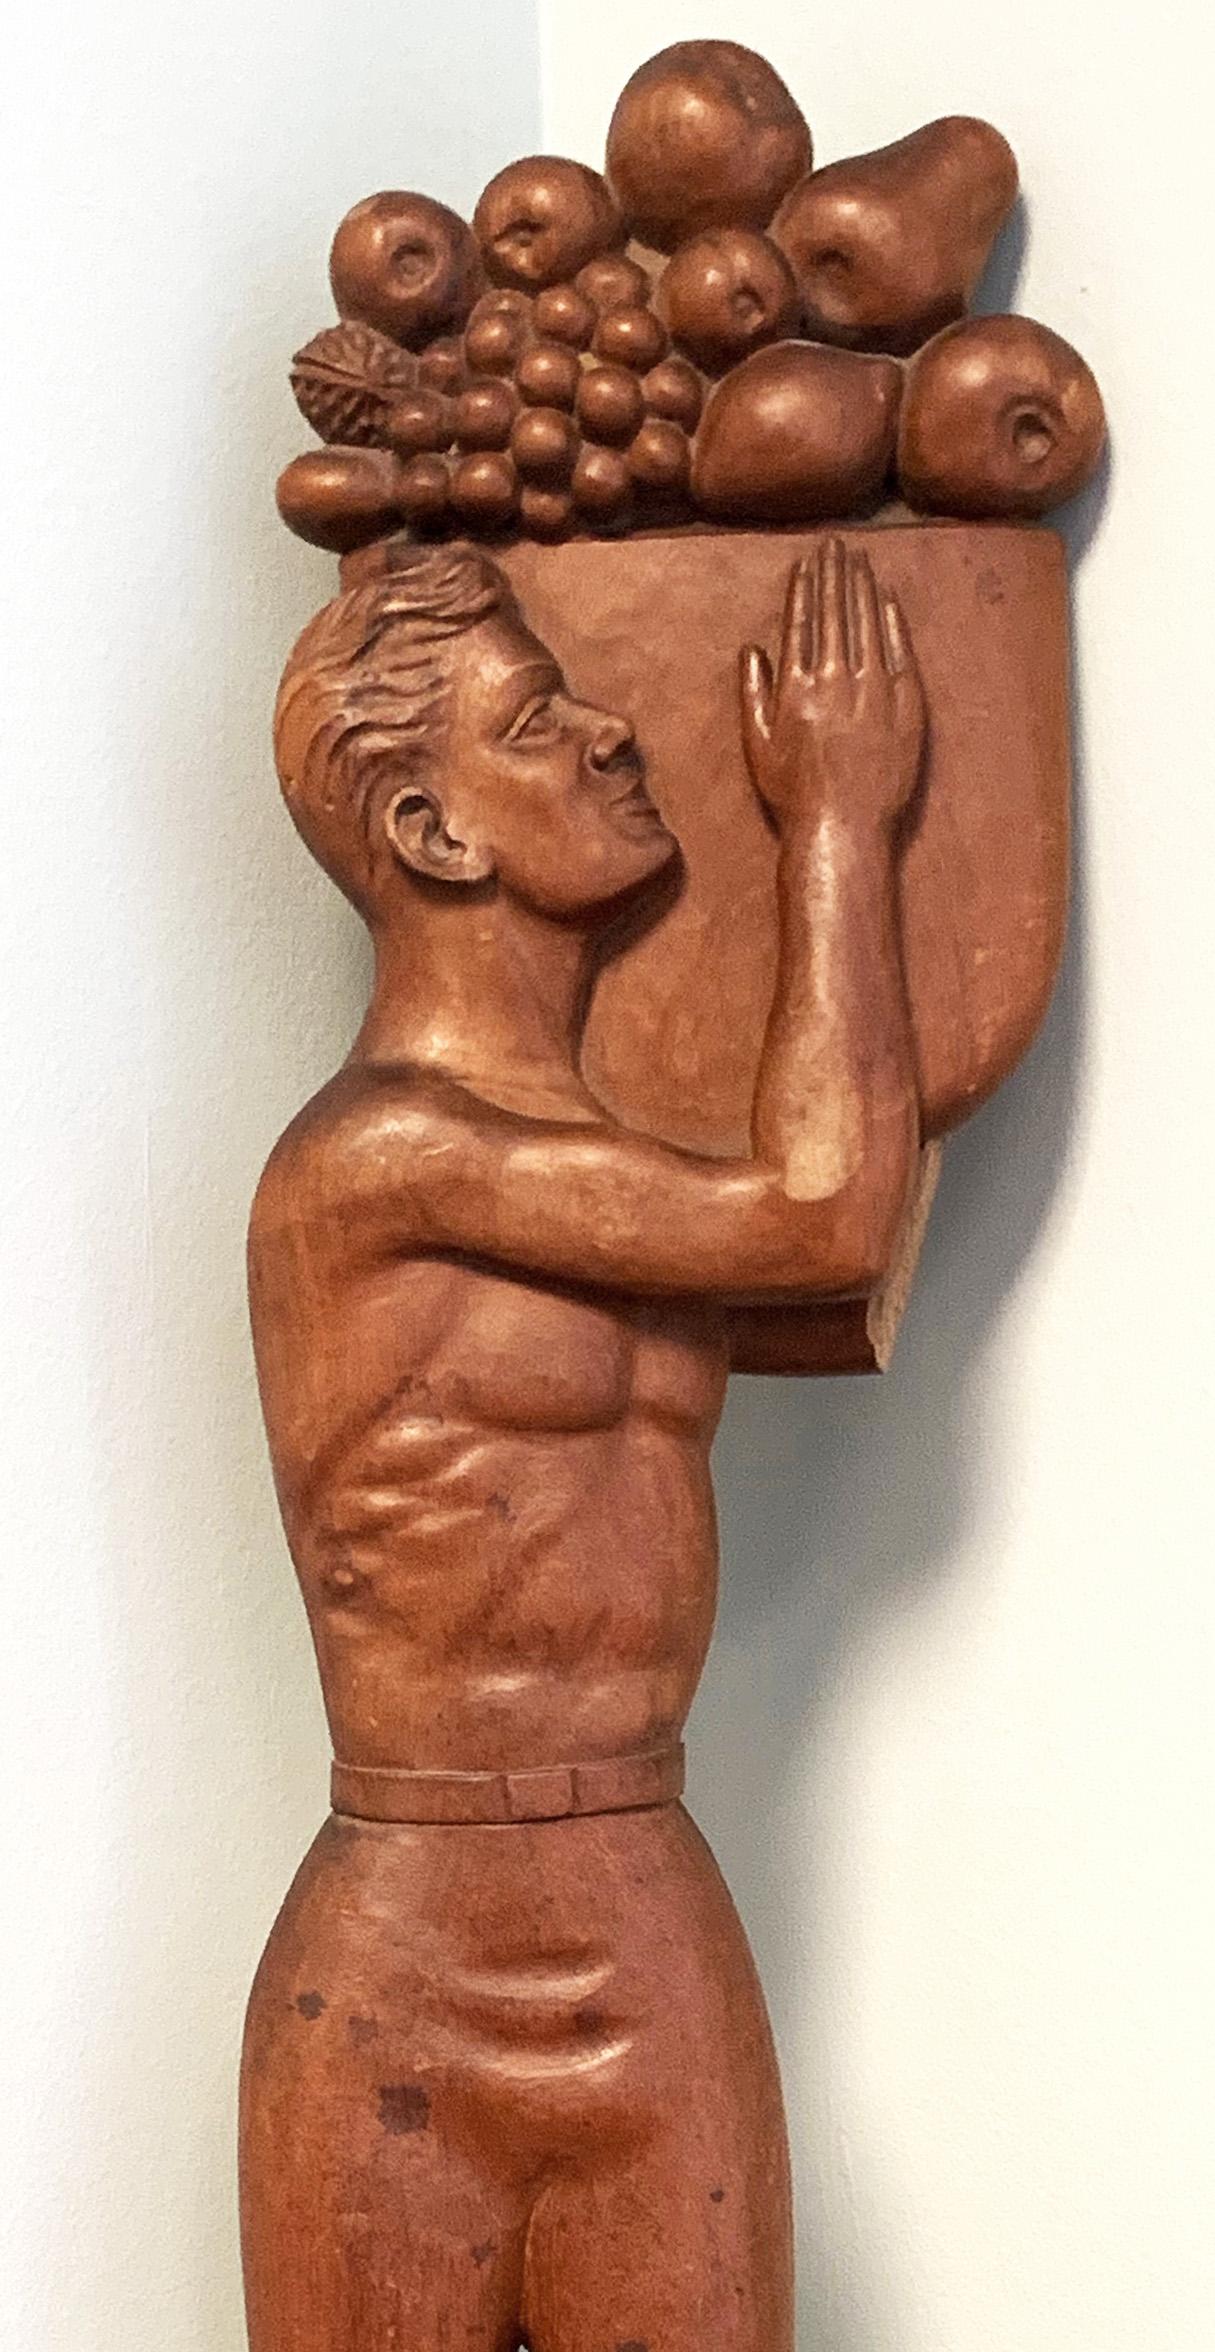 Large and impressive, carved in a naive-sophisticated way that suggests folk art as well as WPA sculptures which glorified the worker, this large bas relief depicts a shirtless young man carrying a large basket overflowing with grapes, apples, pears